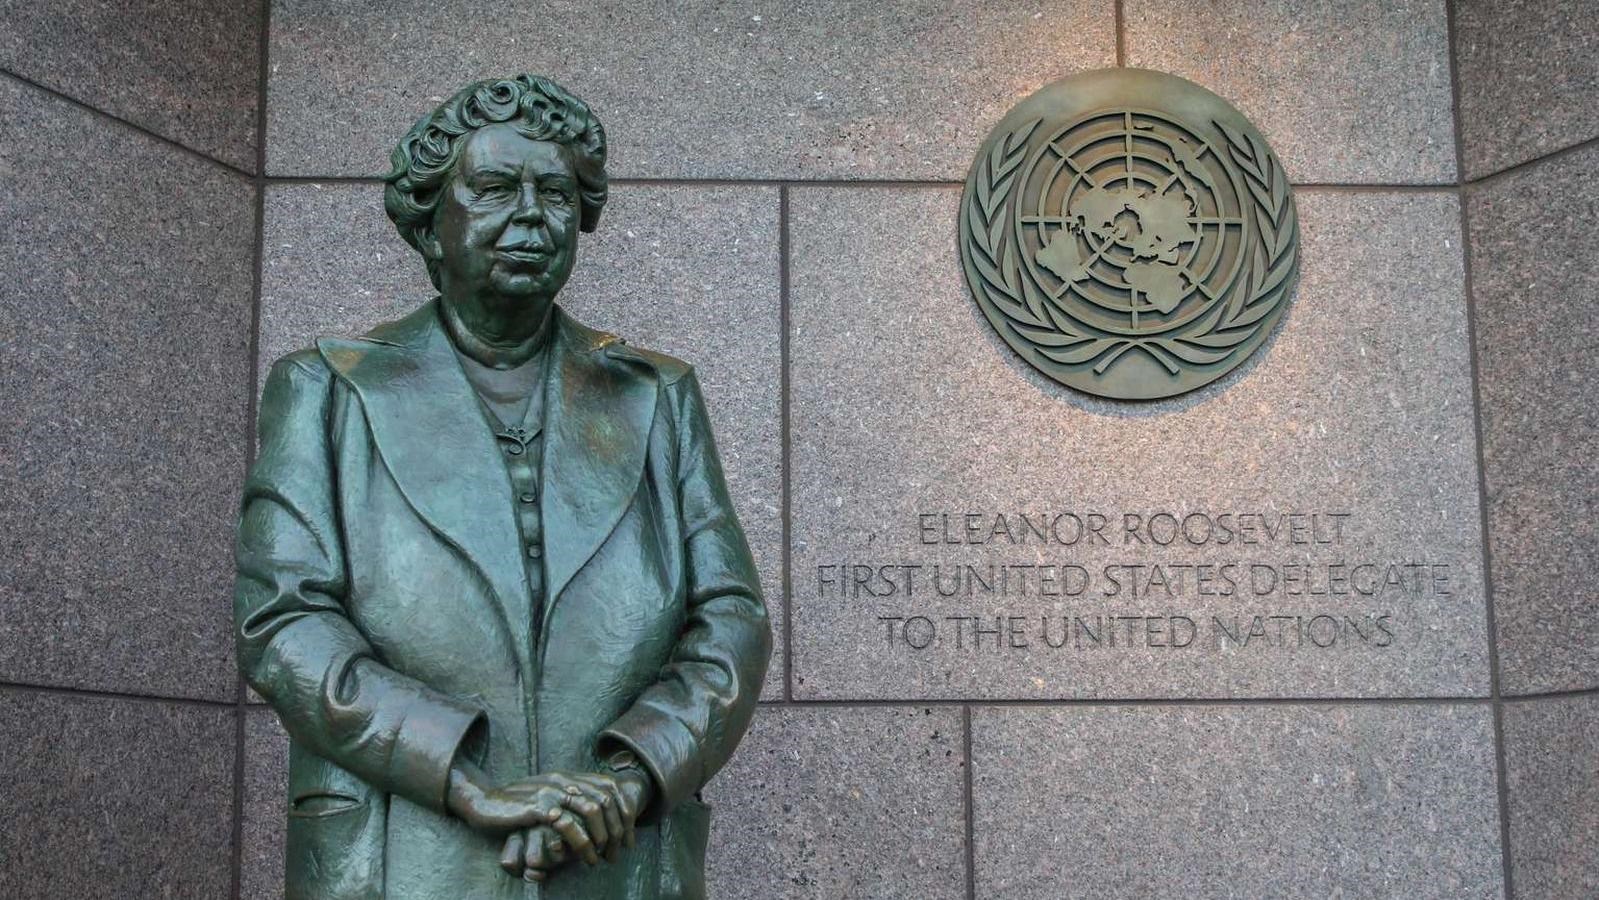 Statue: “Eleanor Roosevelt: First United States delegate to the United Nations”, United Nations Logo